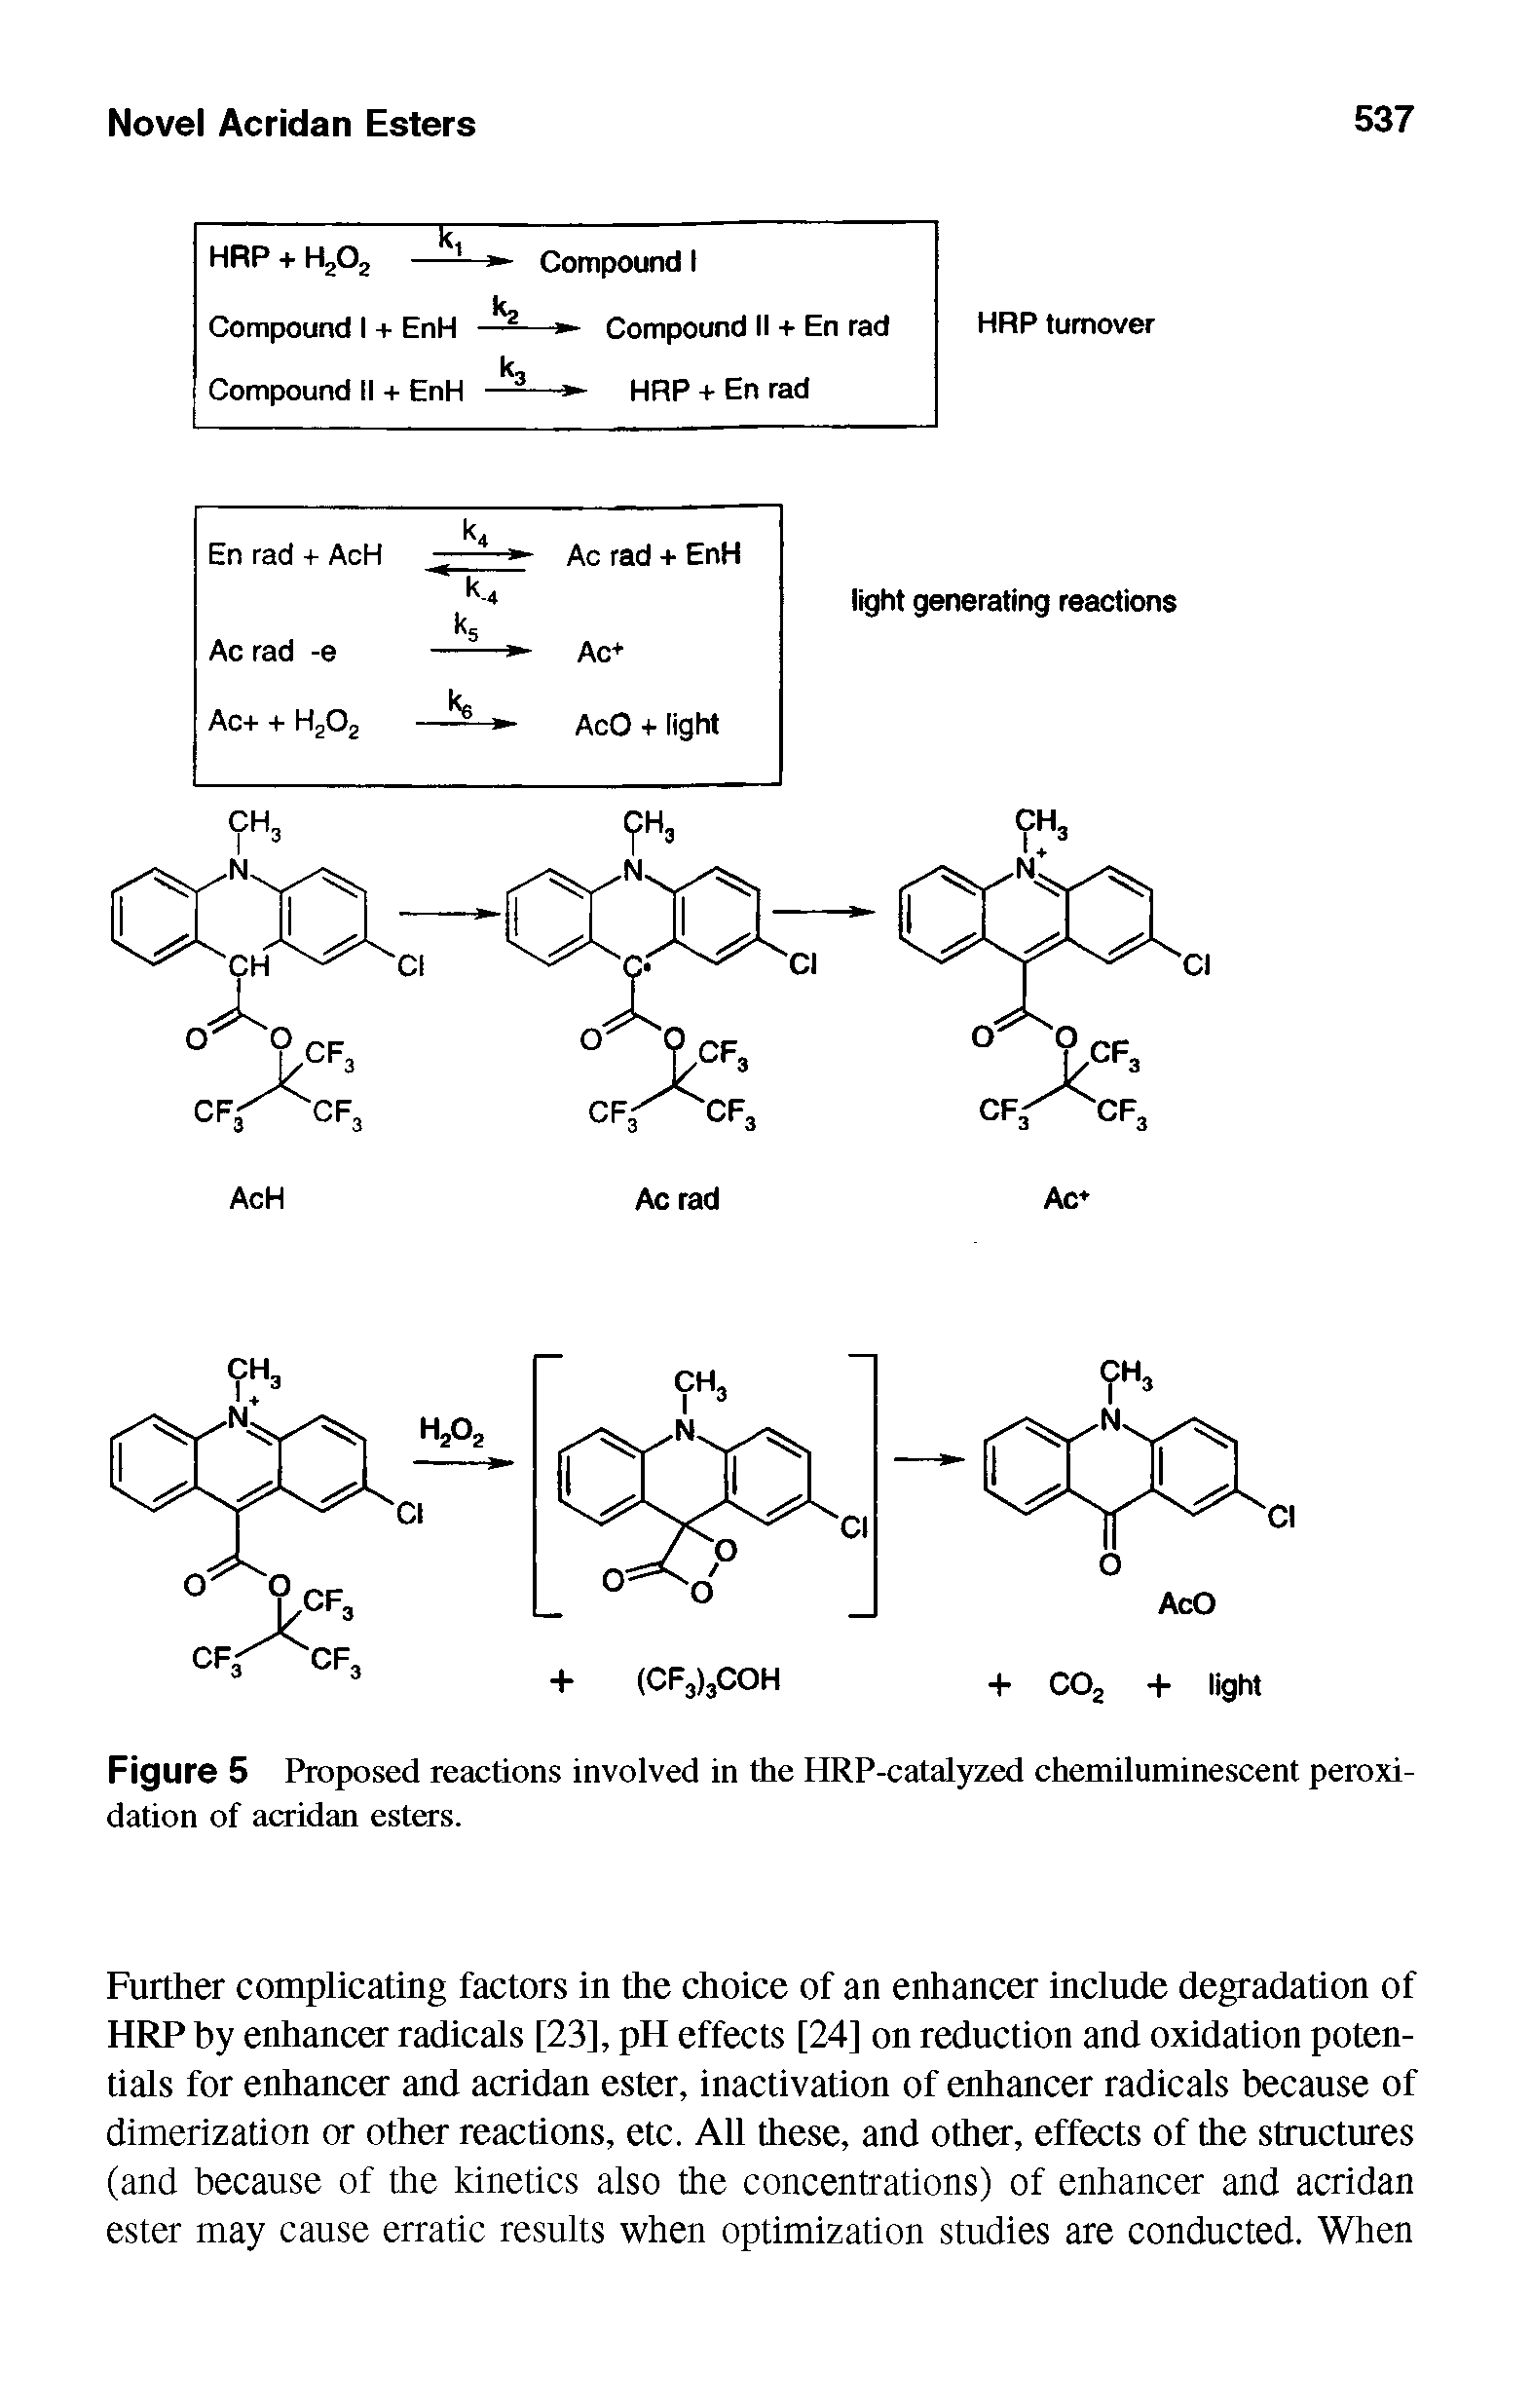 Figure 5 Proposed reactions involved in the HRP-catalyzed chemiluminescent peroxidation of acridan esters.